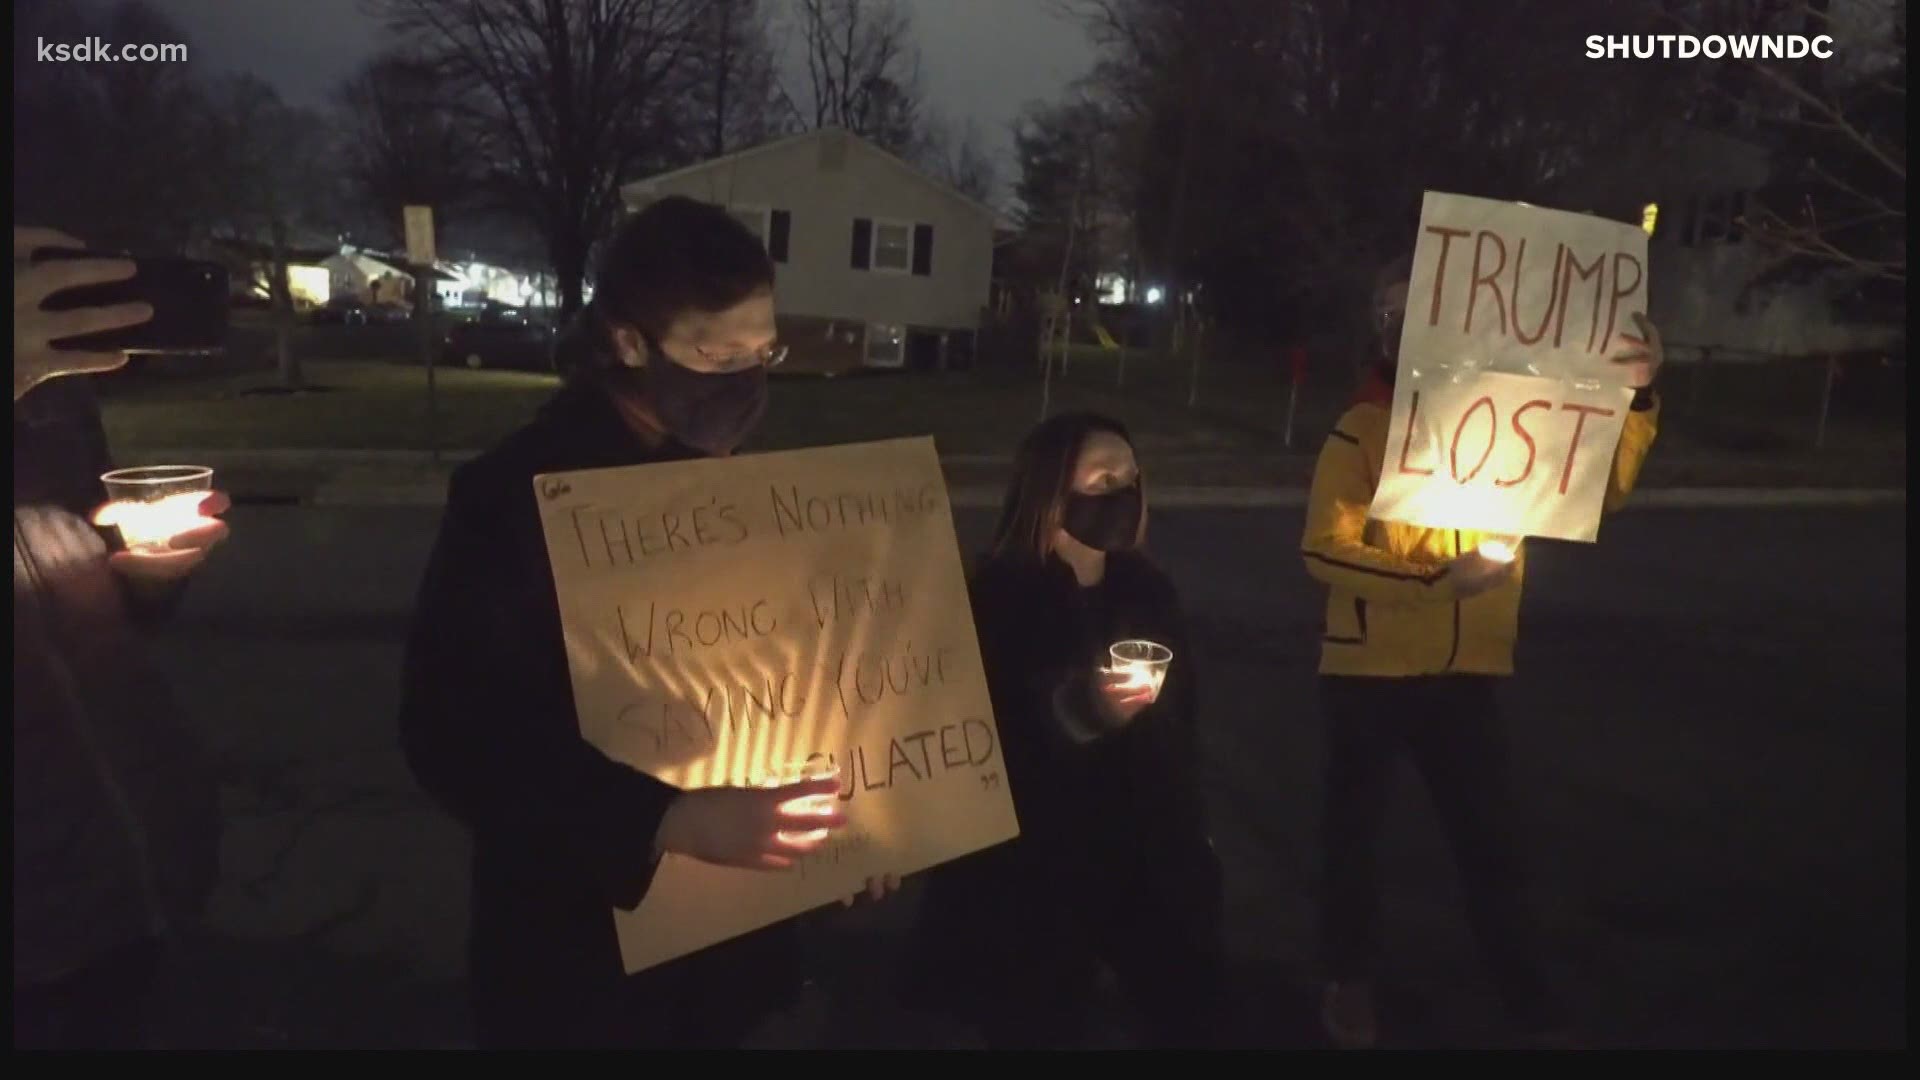 The senator from Missouri said his wife and newborn were inside while protesters gathered outside their home in Virginia. Organizers called it a candlelight vigil